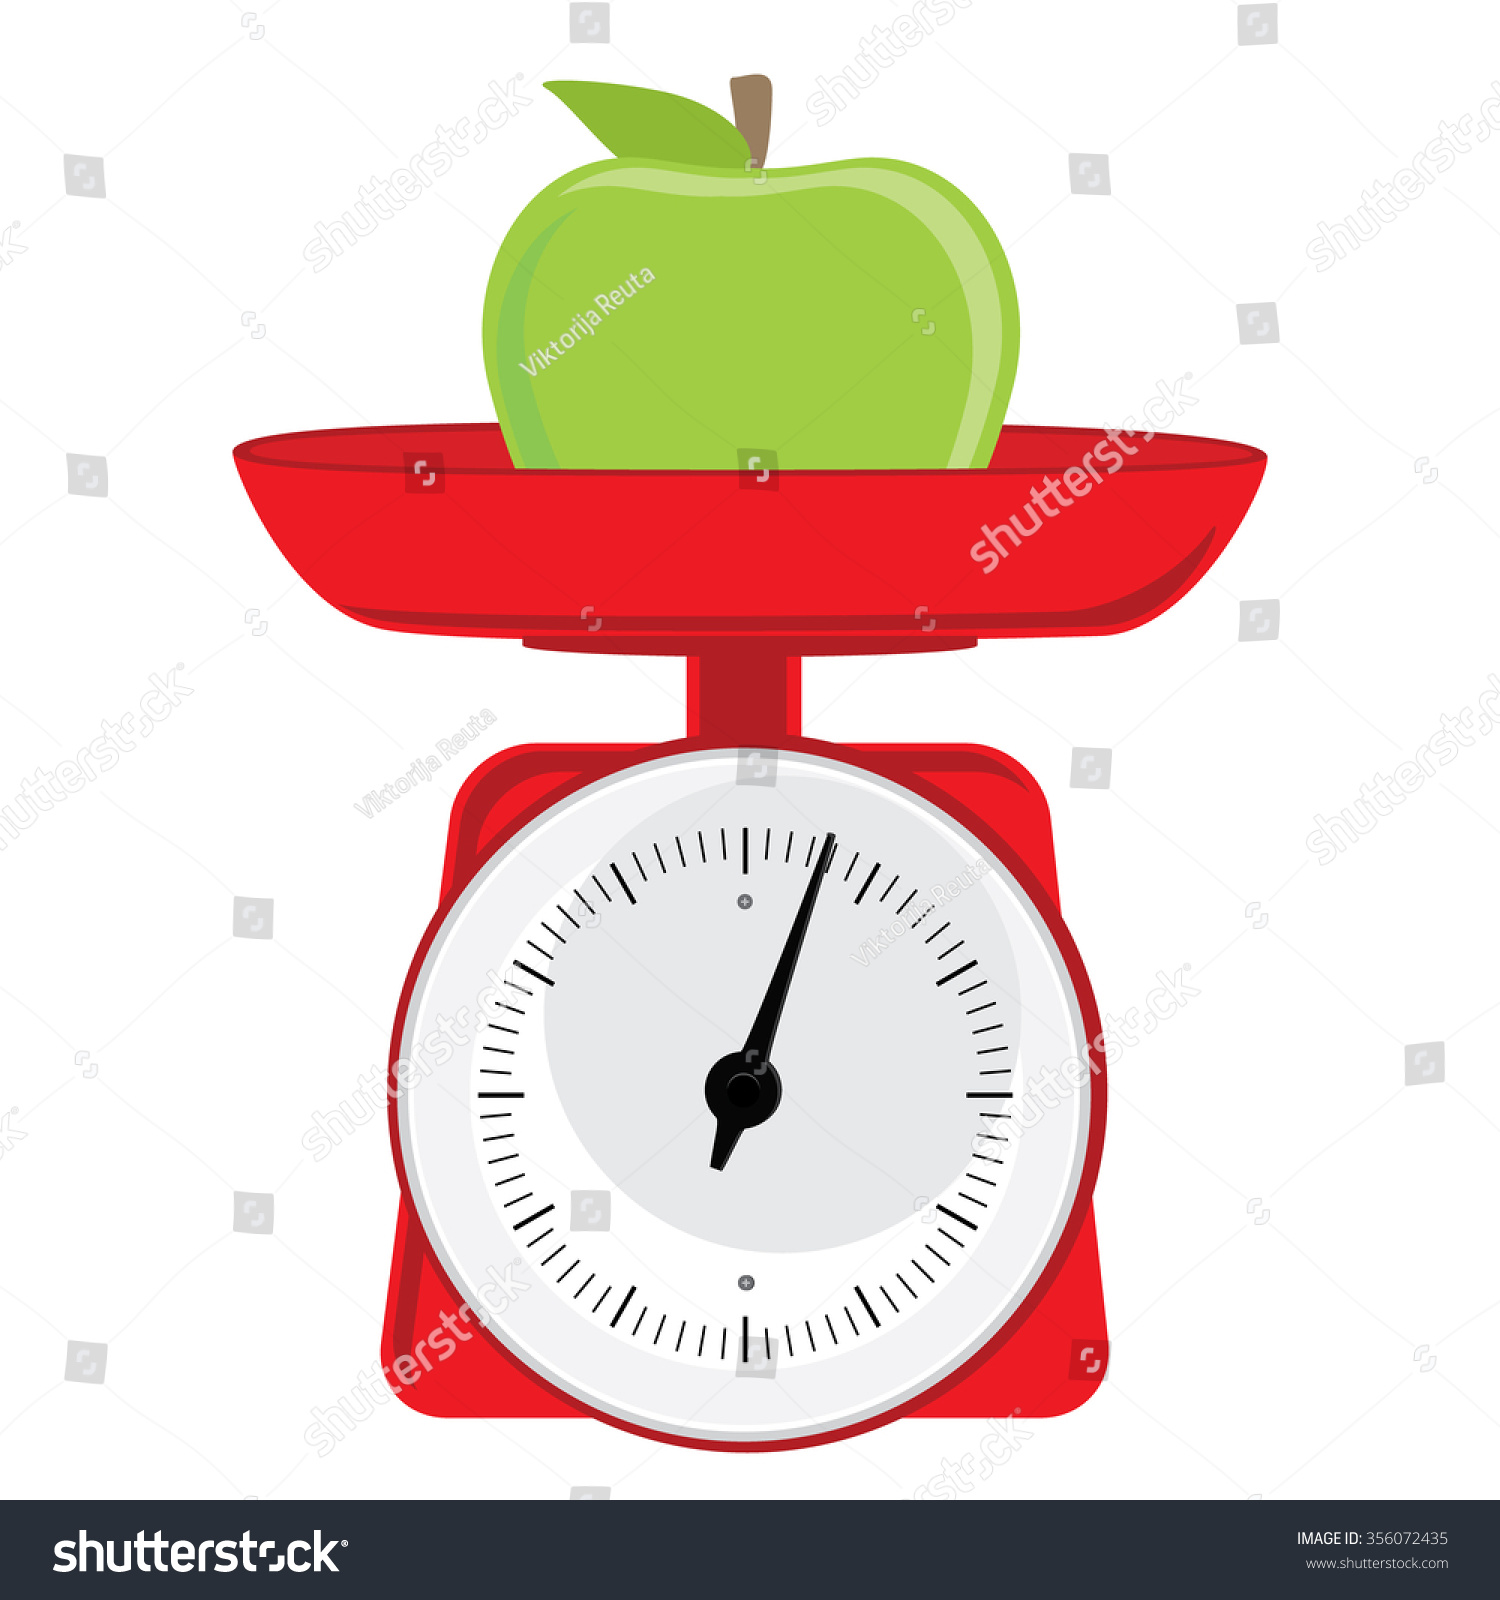 Vector Illustration Red Weight Scale Green Stock Vector 356072435 ...